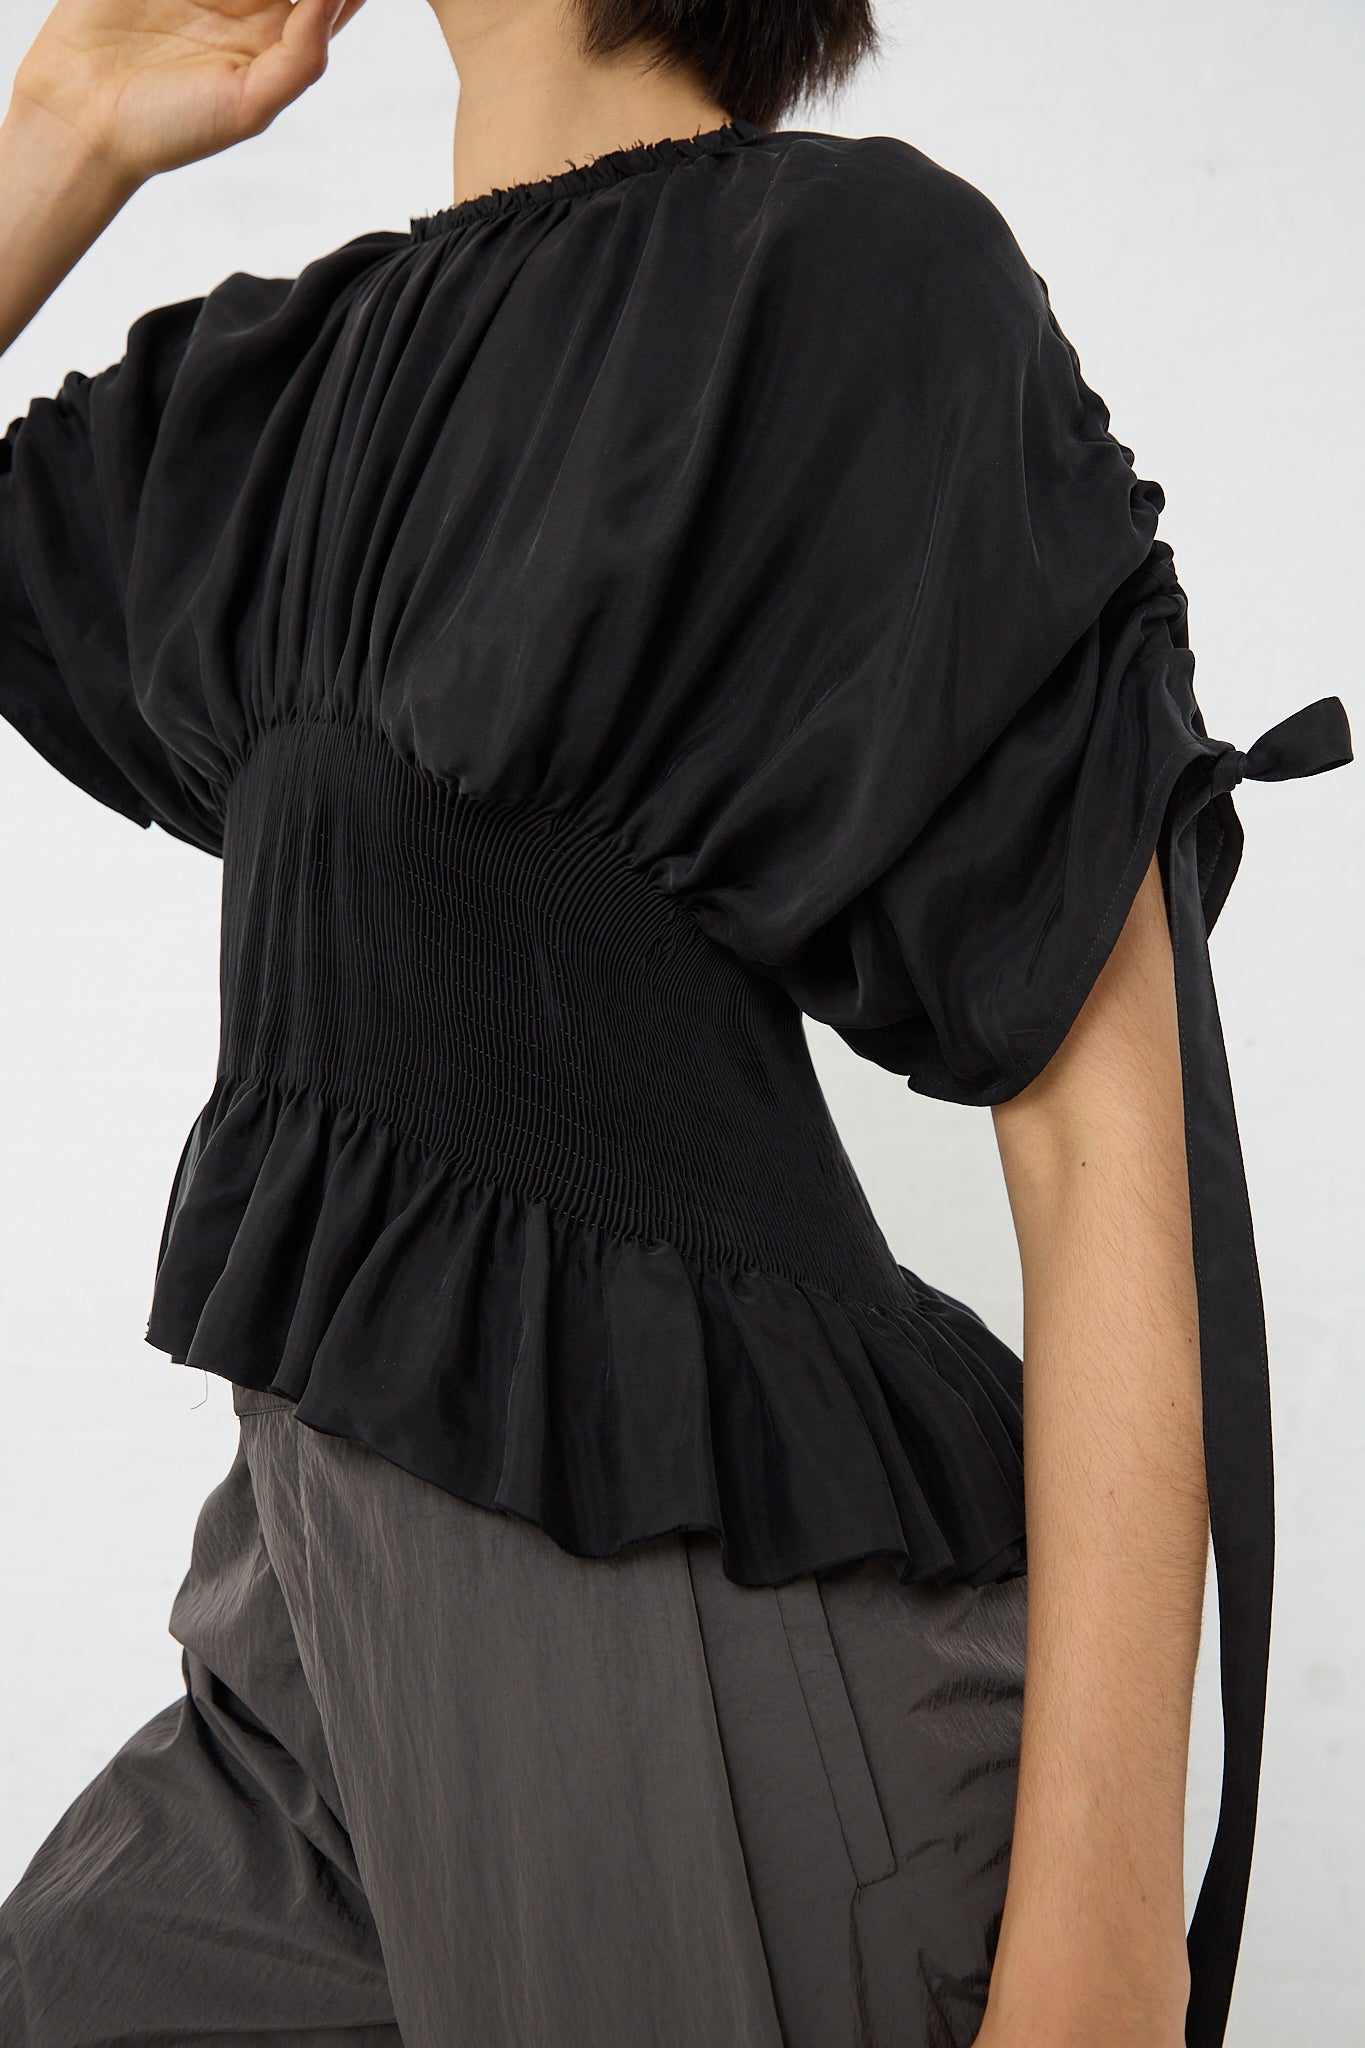 A woman wearing a Cupro Sanfona Top in Washed Black made by Renata Brenha with ruffles made from recycled cupro. Side view.